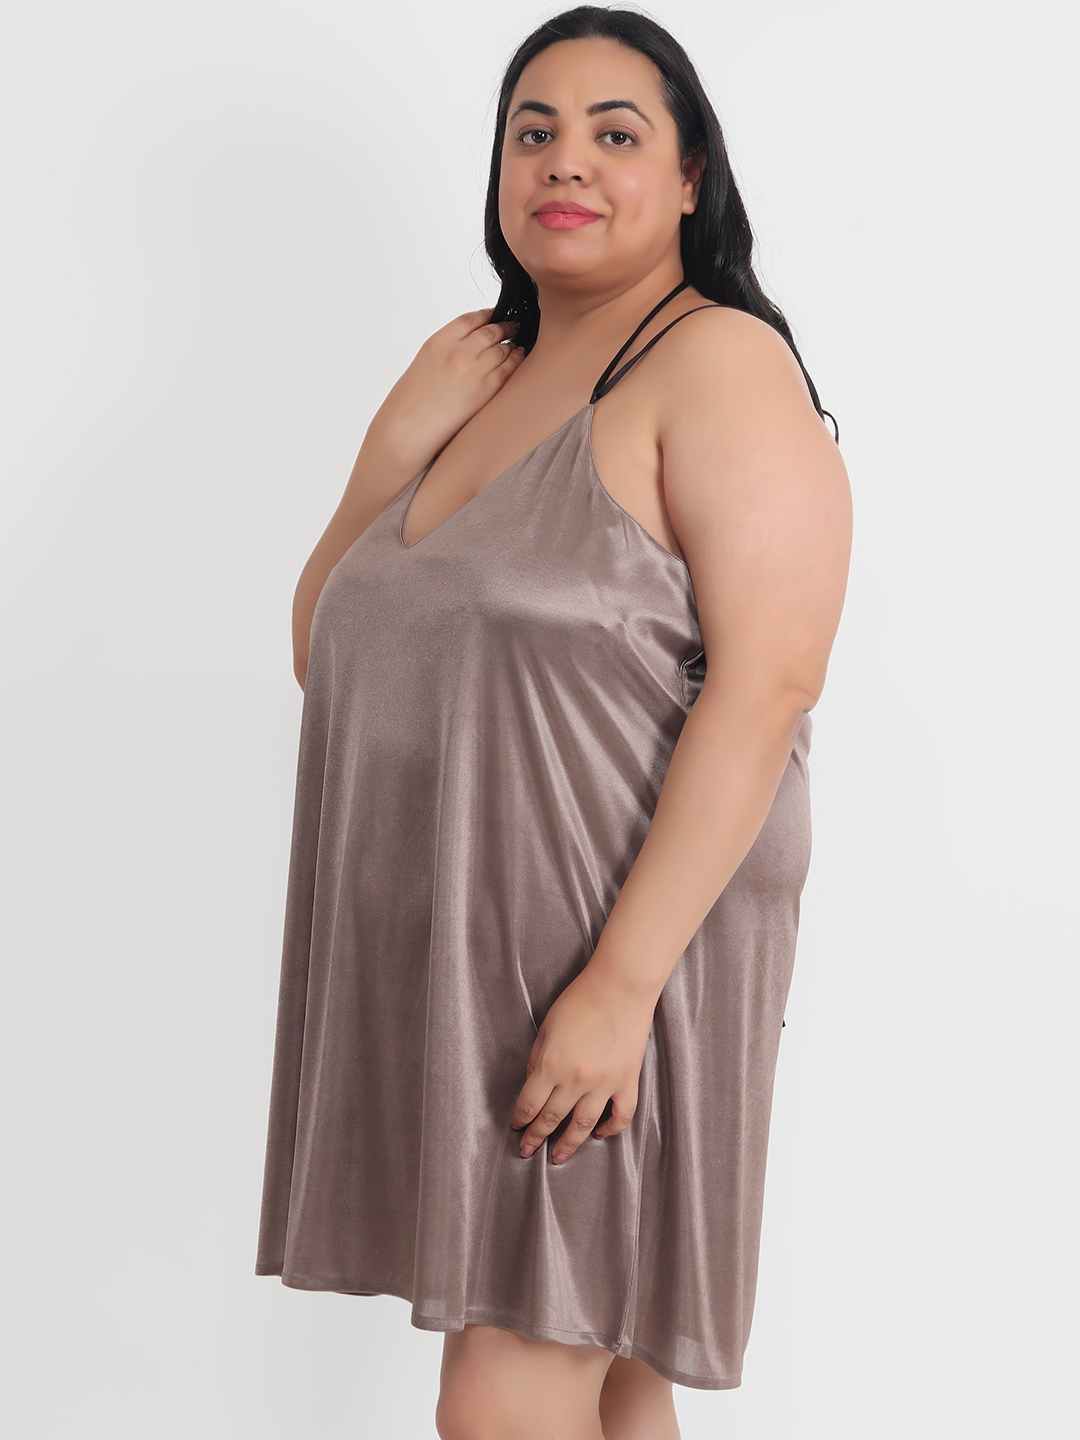 Plus Size Dress With Shrug For Women's and Girl's